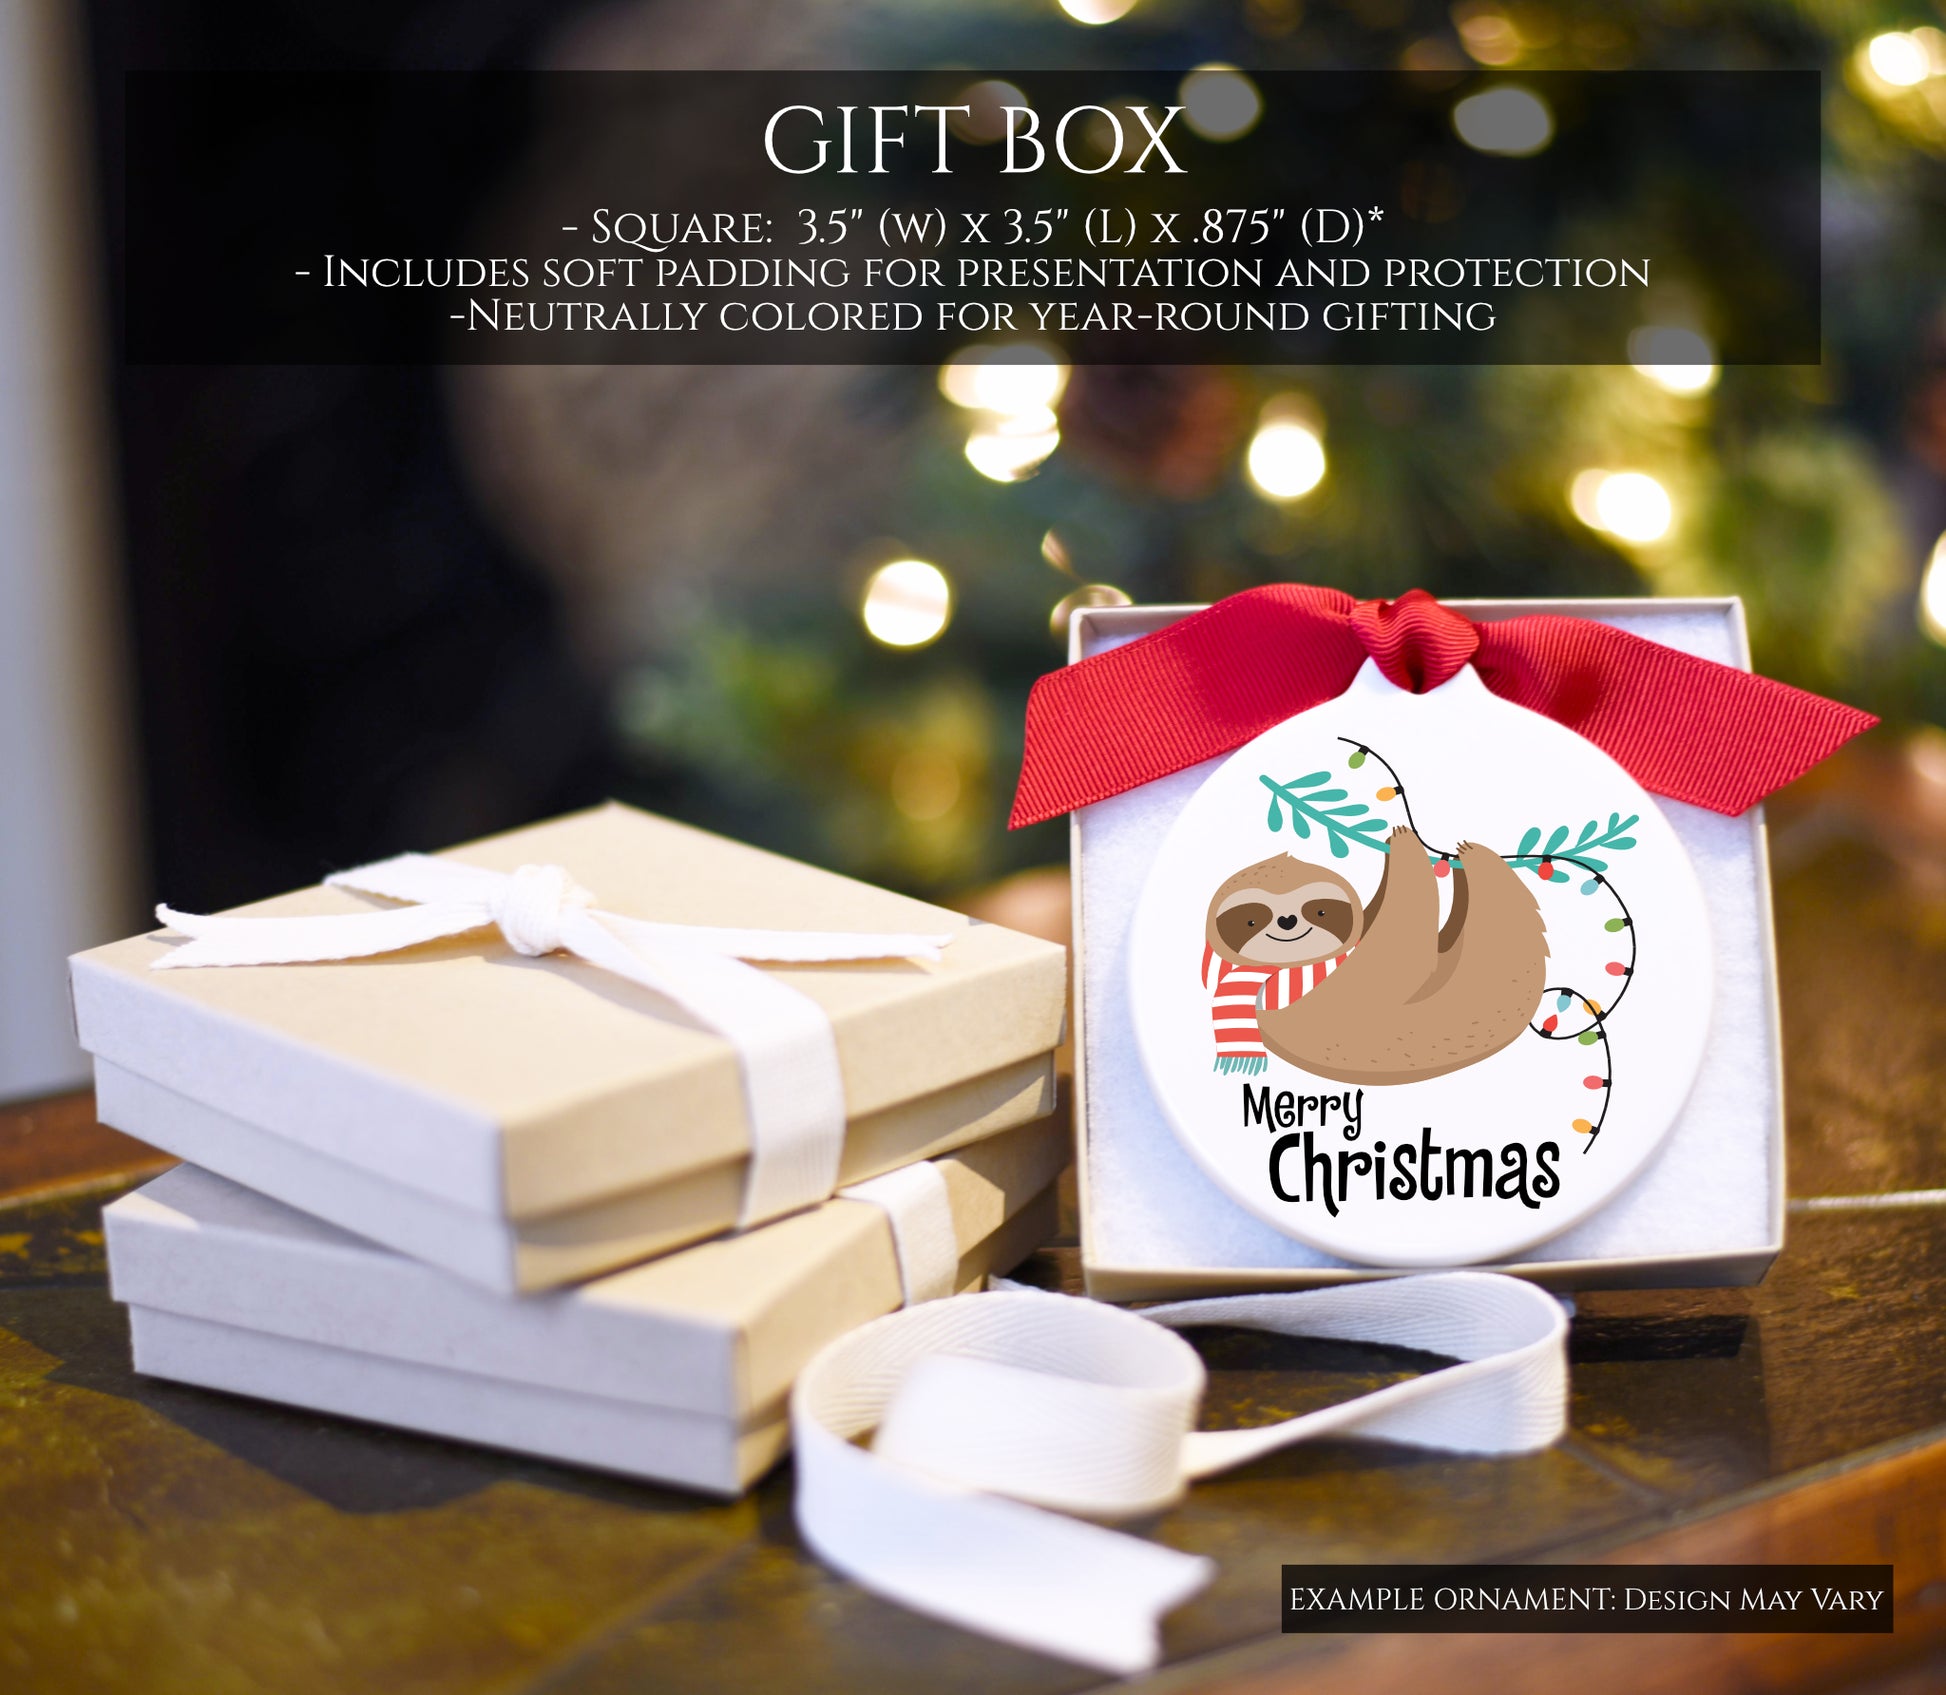 Christmas Ornament Gift Box, Add-on for McKinney Printing Company Ornaments, Neutrally Colored for Year-round Gifting  